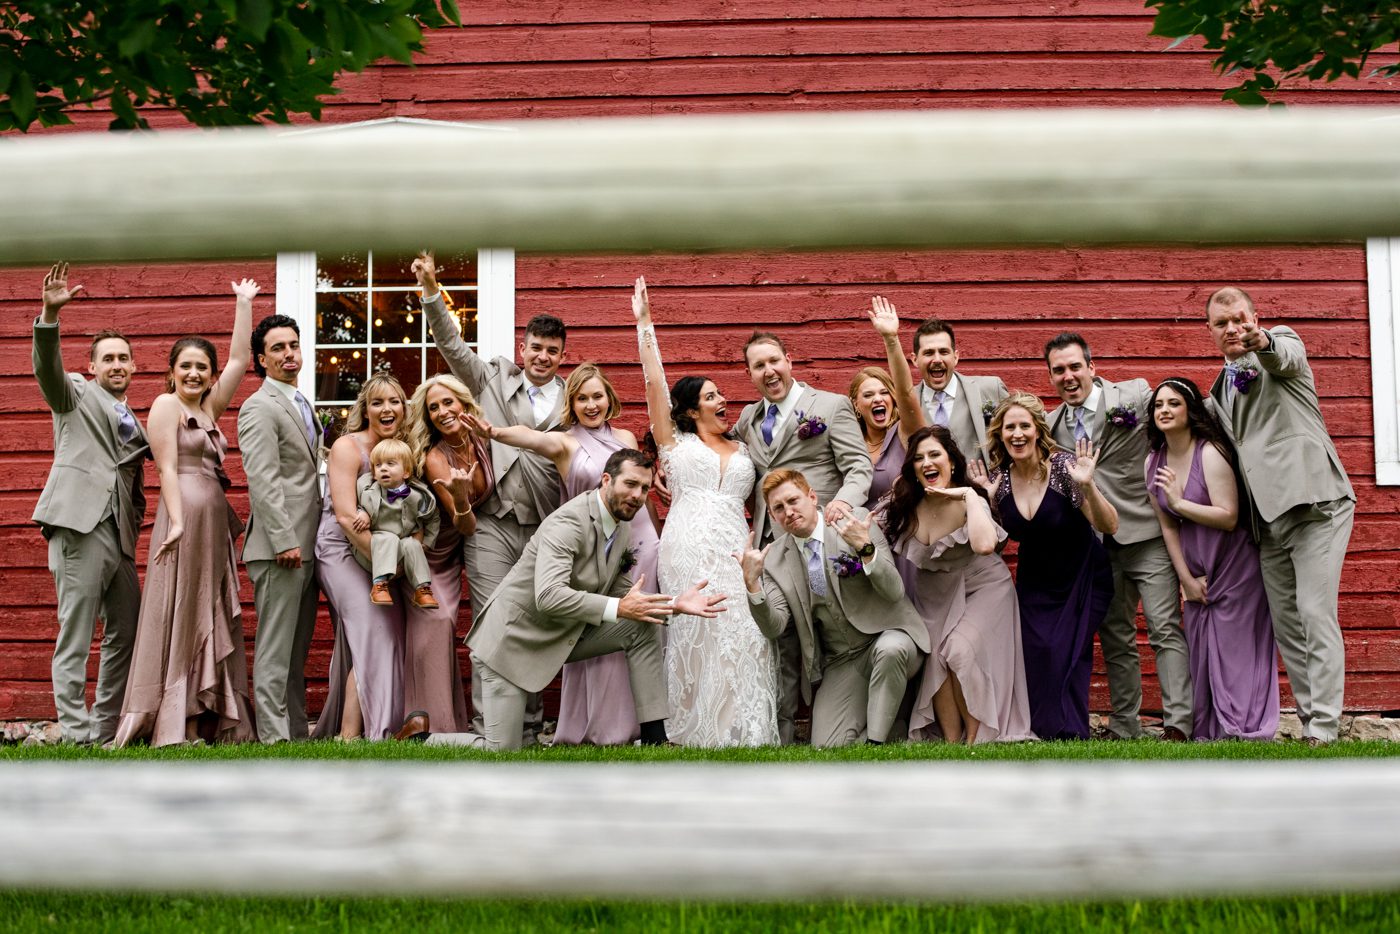 wedding-party-cheer-for-bride-and-groom-against-red-barn